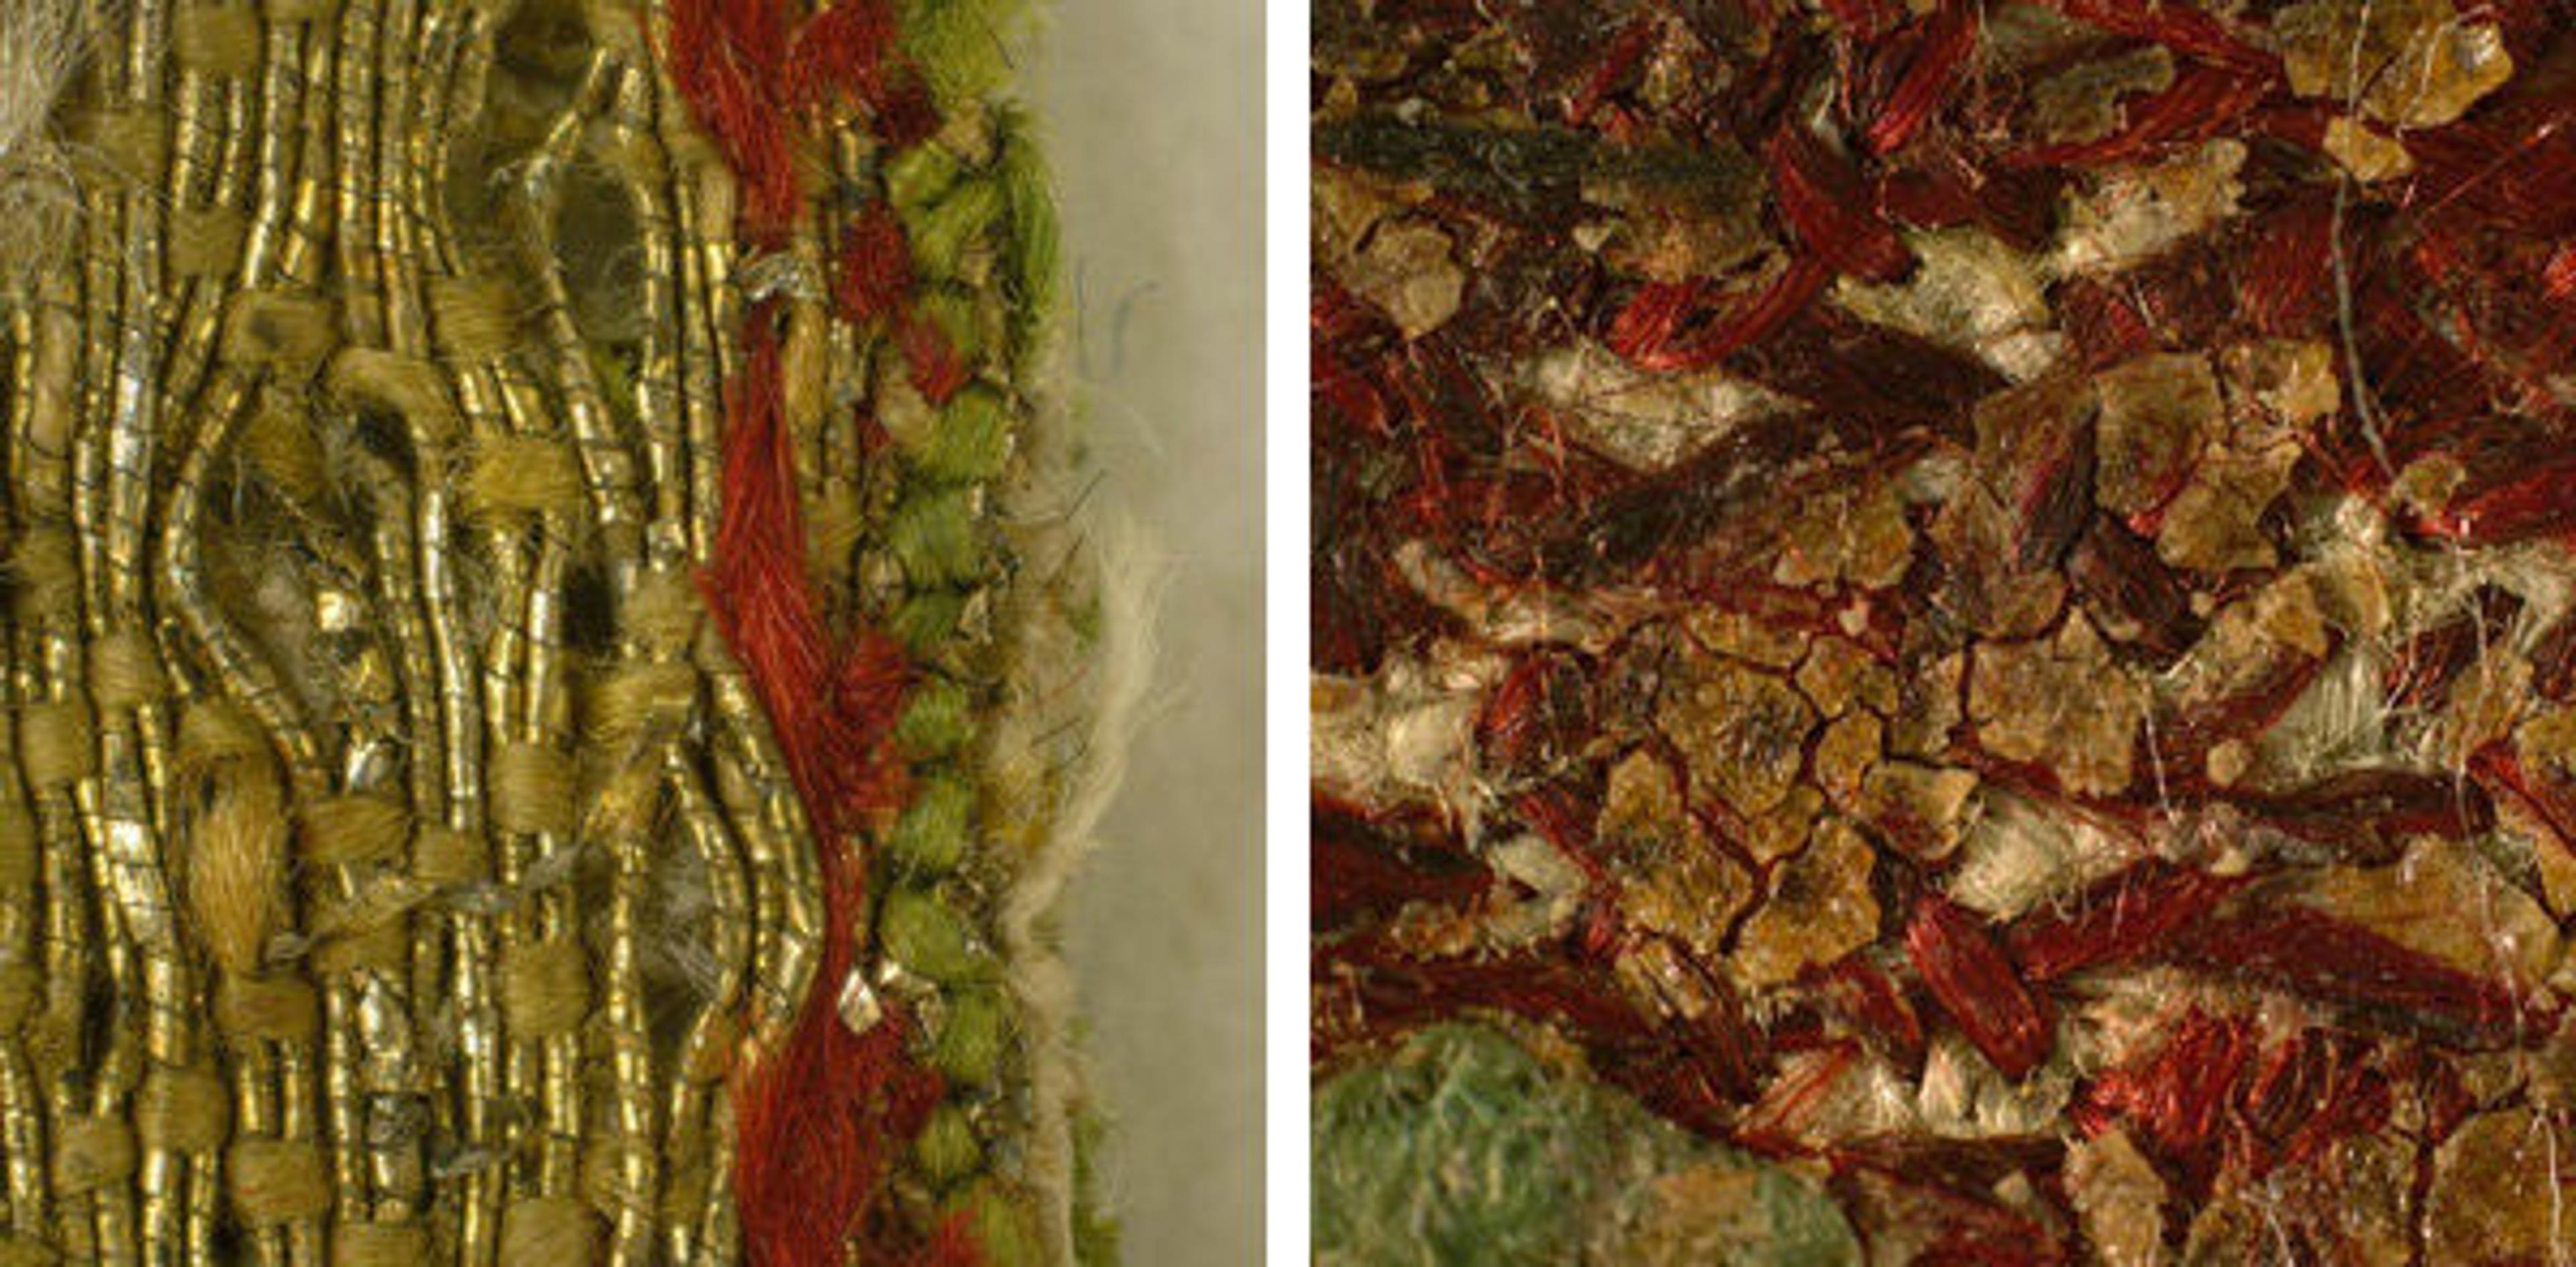 Left: Fig. 6. This magnified detail of the roundel's edge (magnified 5x) from Saint Martin Brings a Dead Man to Life (1975.1.1906), showing red and green silk thread stitches, suggests evidence of its original boundary or previous application to a vestment. Right: Fig. 7. Detail of the reverse surface of Saint Martin Brings a Dead Man to Life (1975.1.1906)